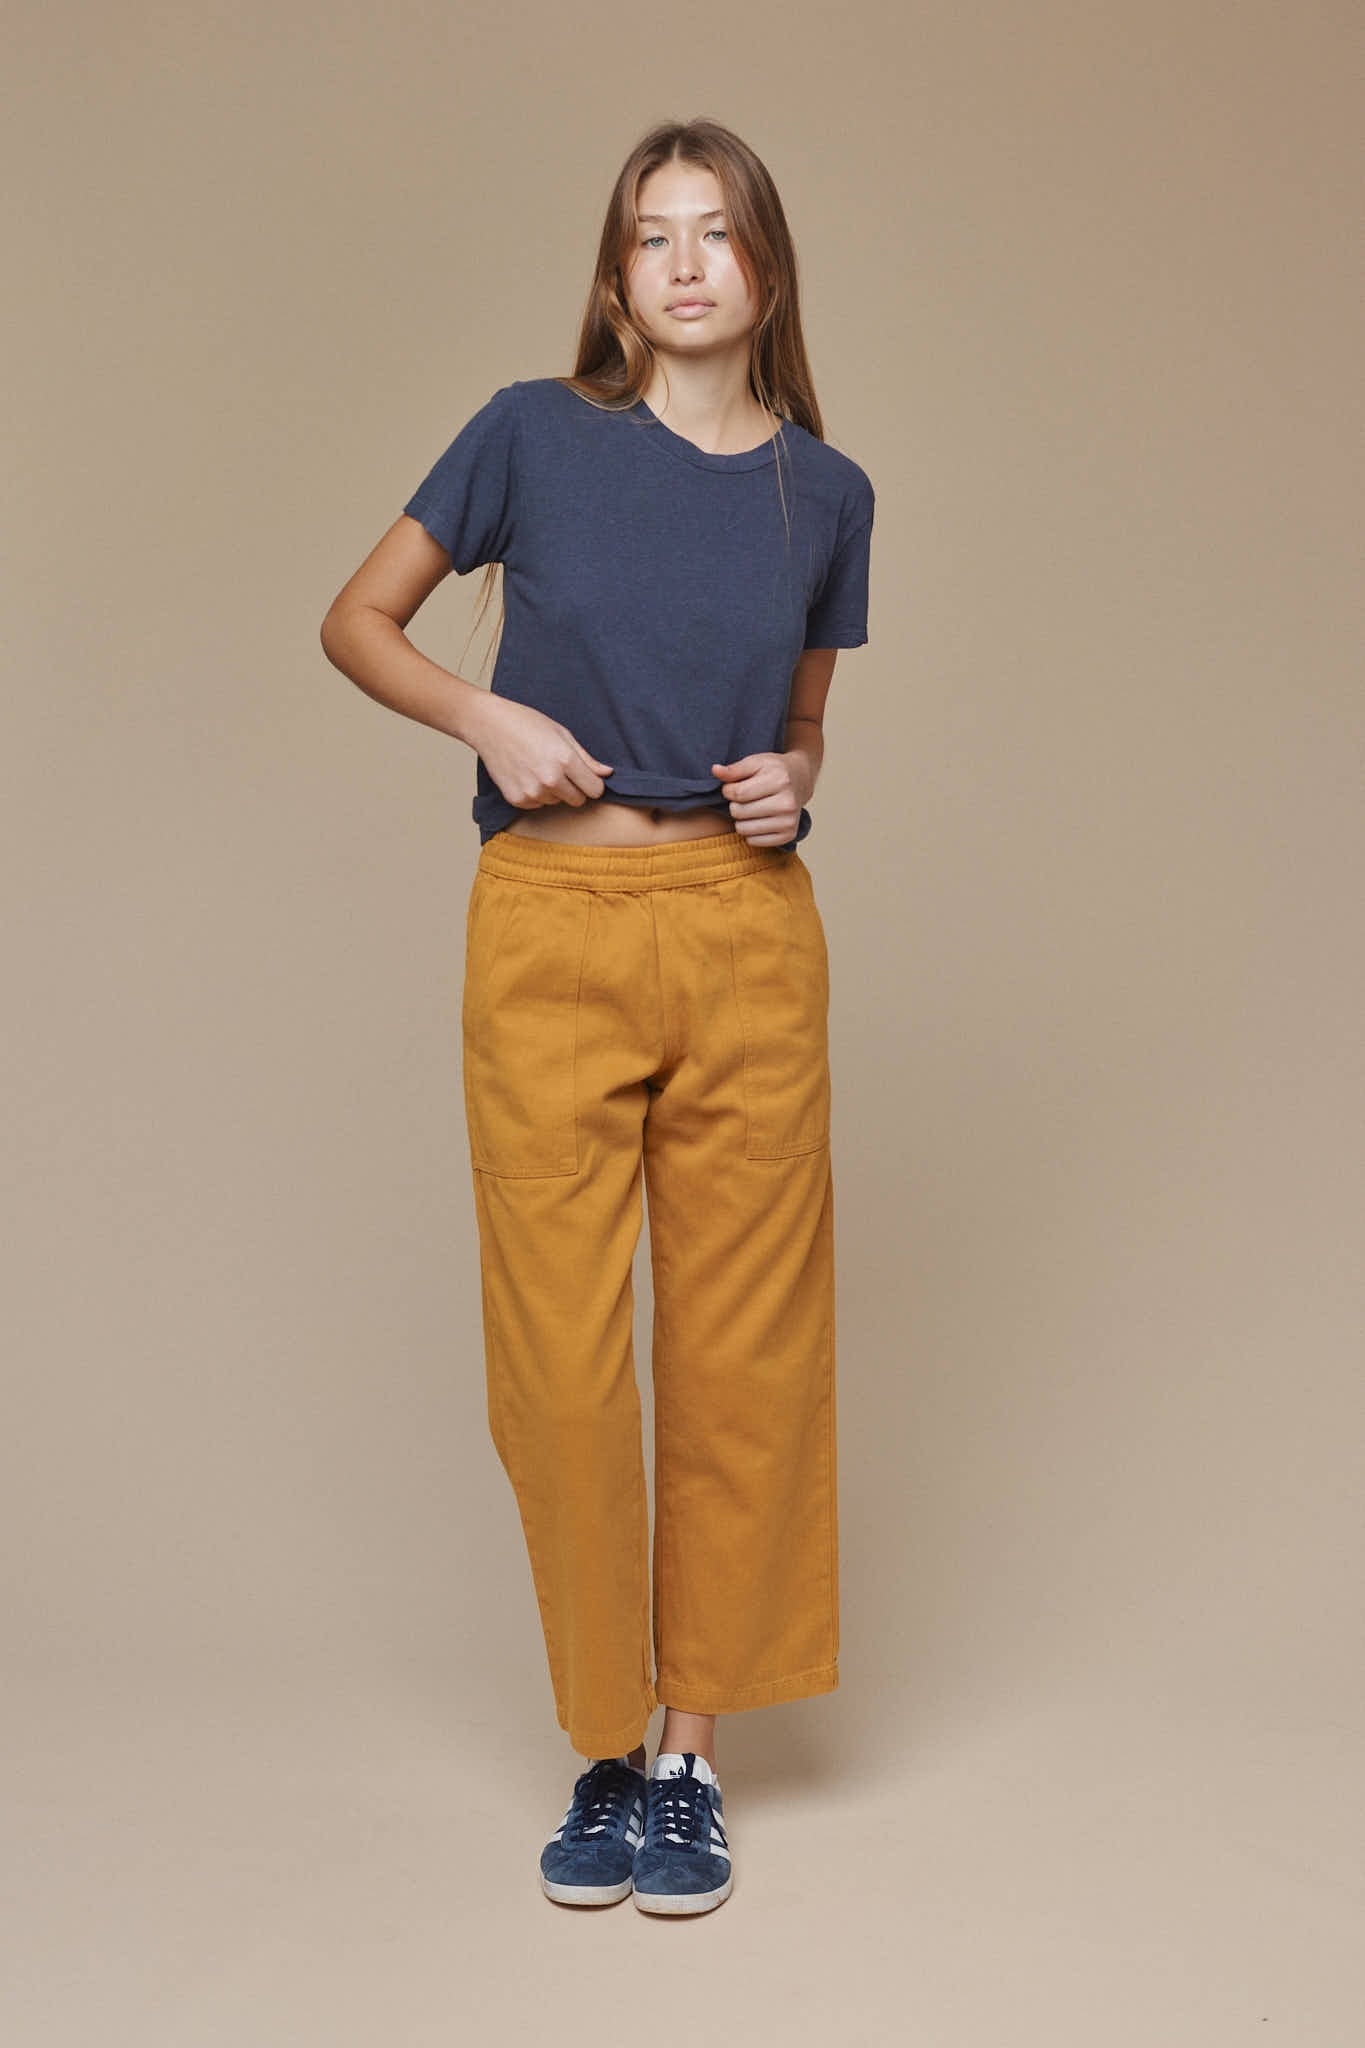 Jungmaven hemp and cotton twill ocean pants sustainably made in Los Angeles.